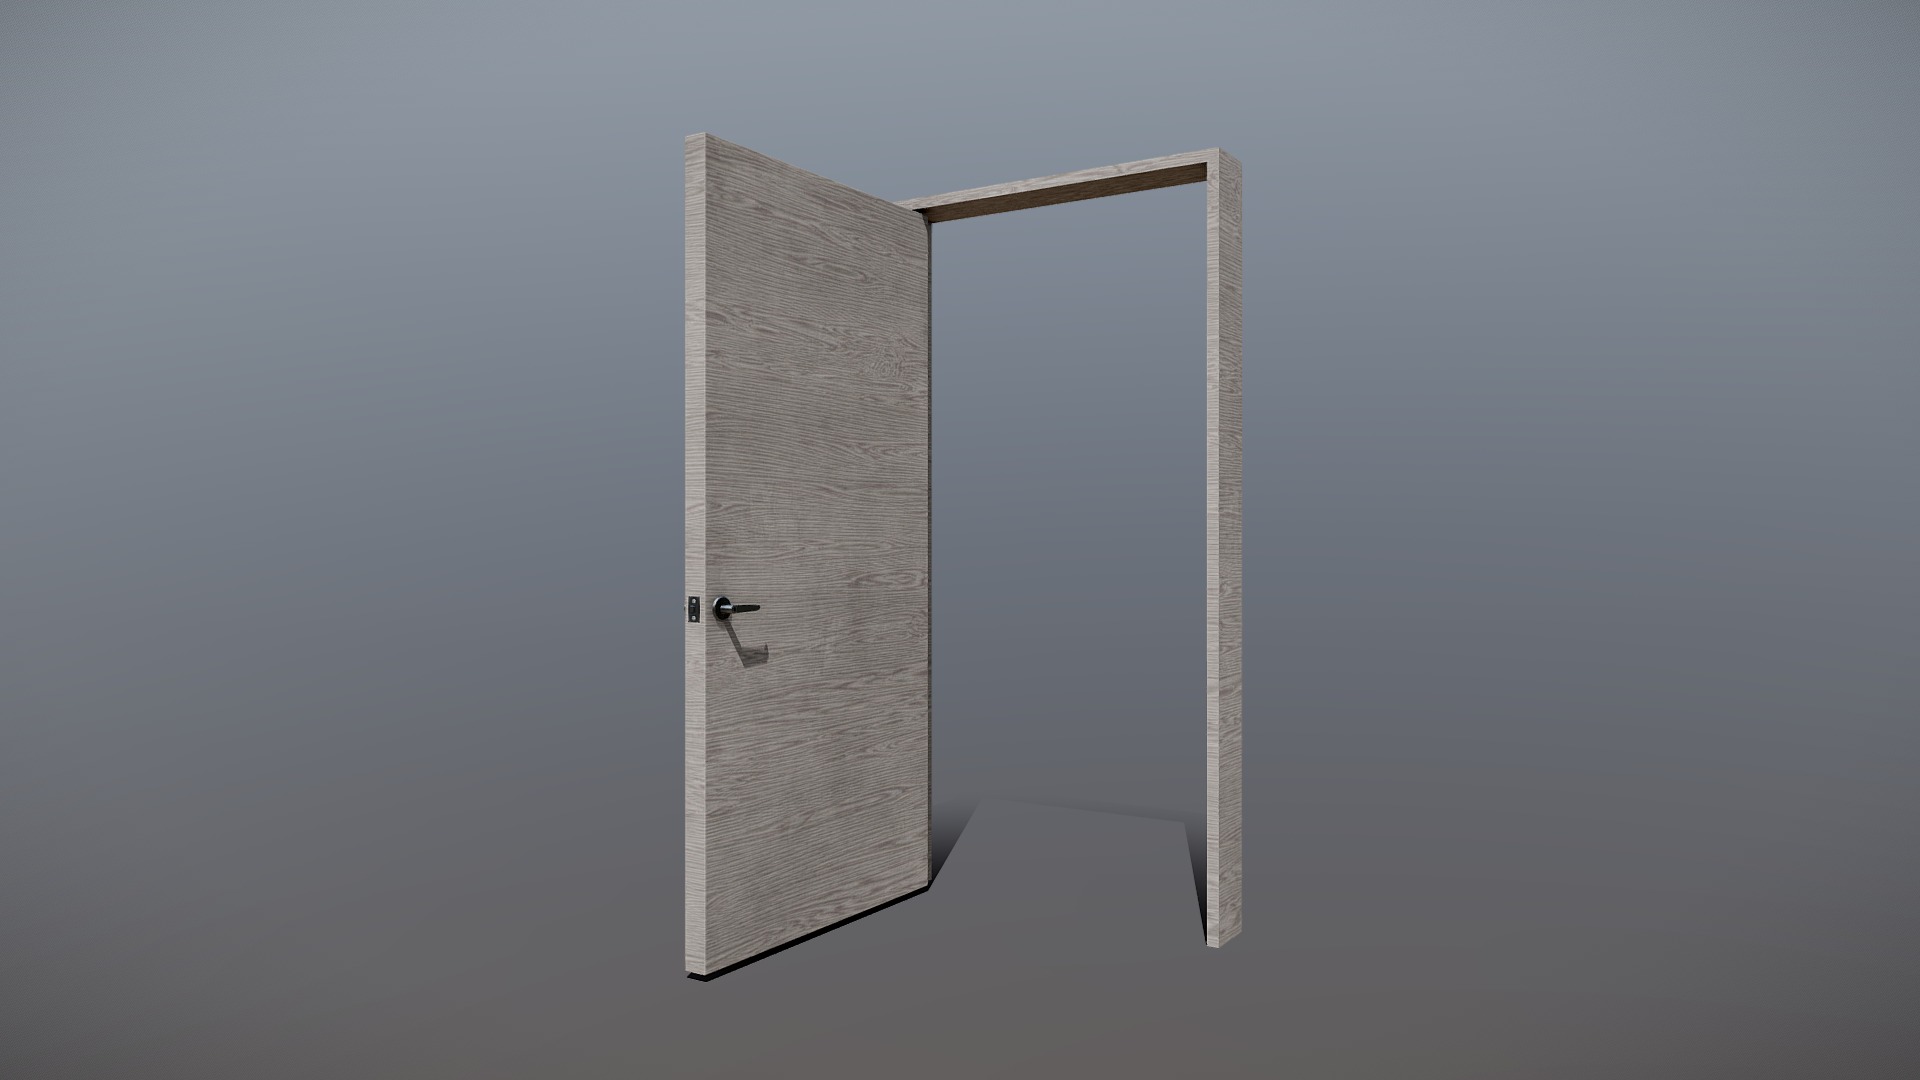 3D model Minimalist Door Grey - This is a 3D model of the Minimalist Door Grey. The 3D model is about a white rectangular object with a handle.